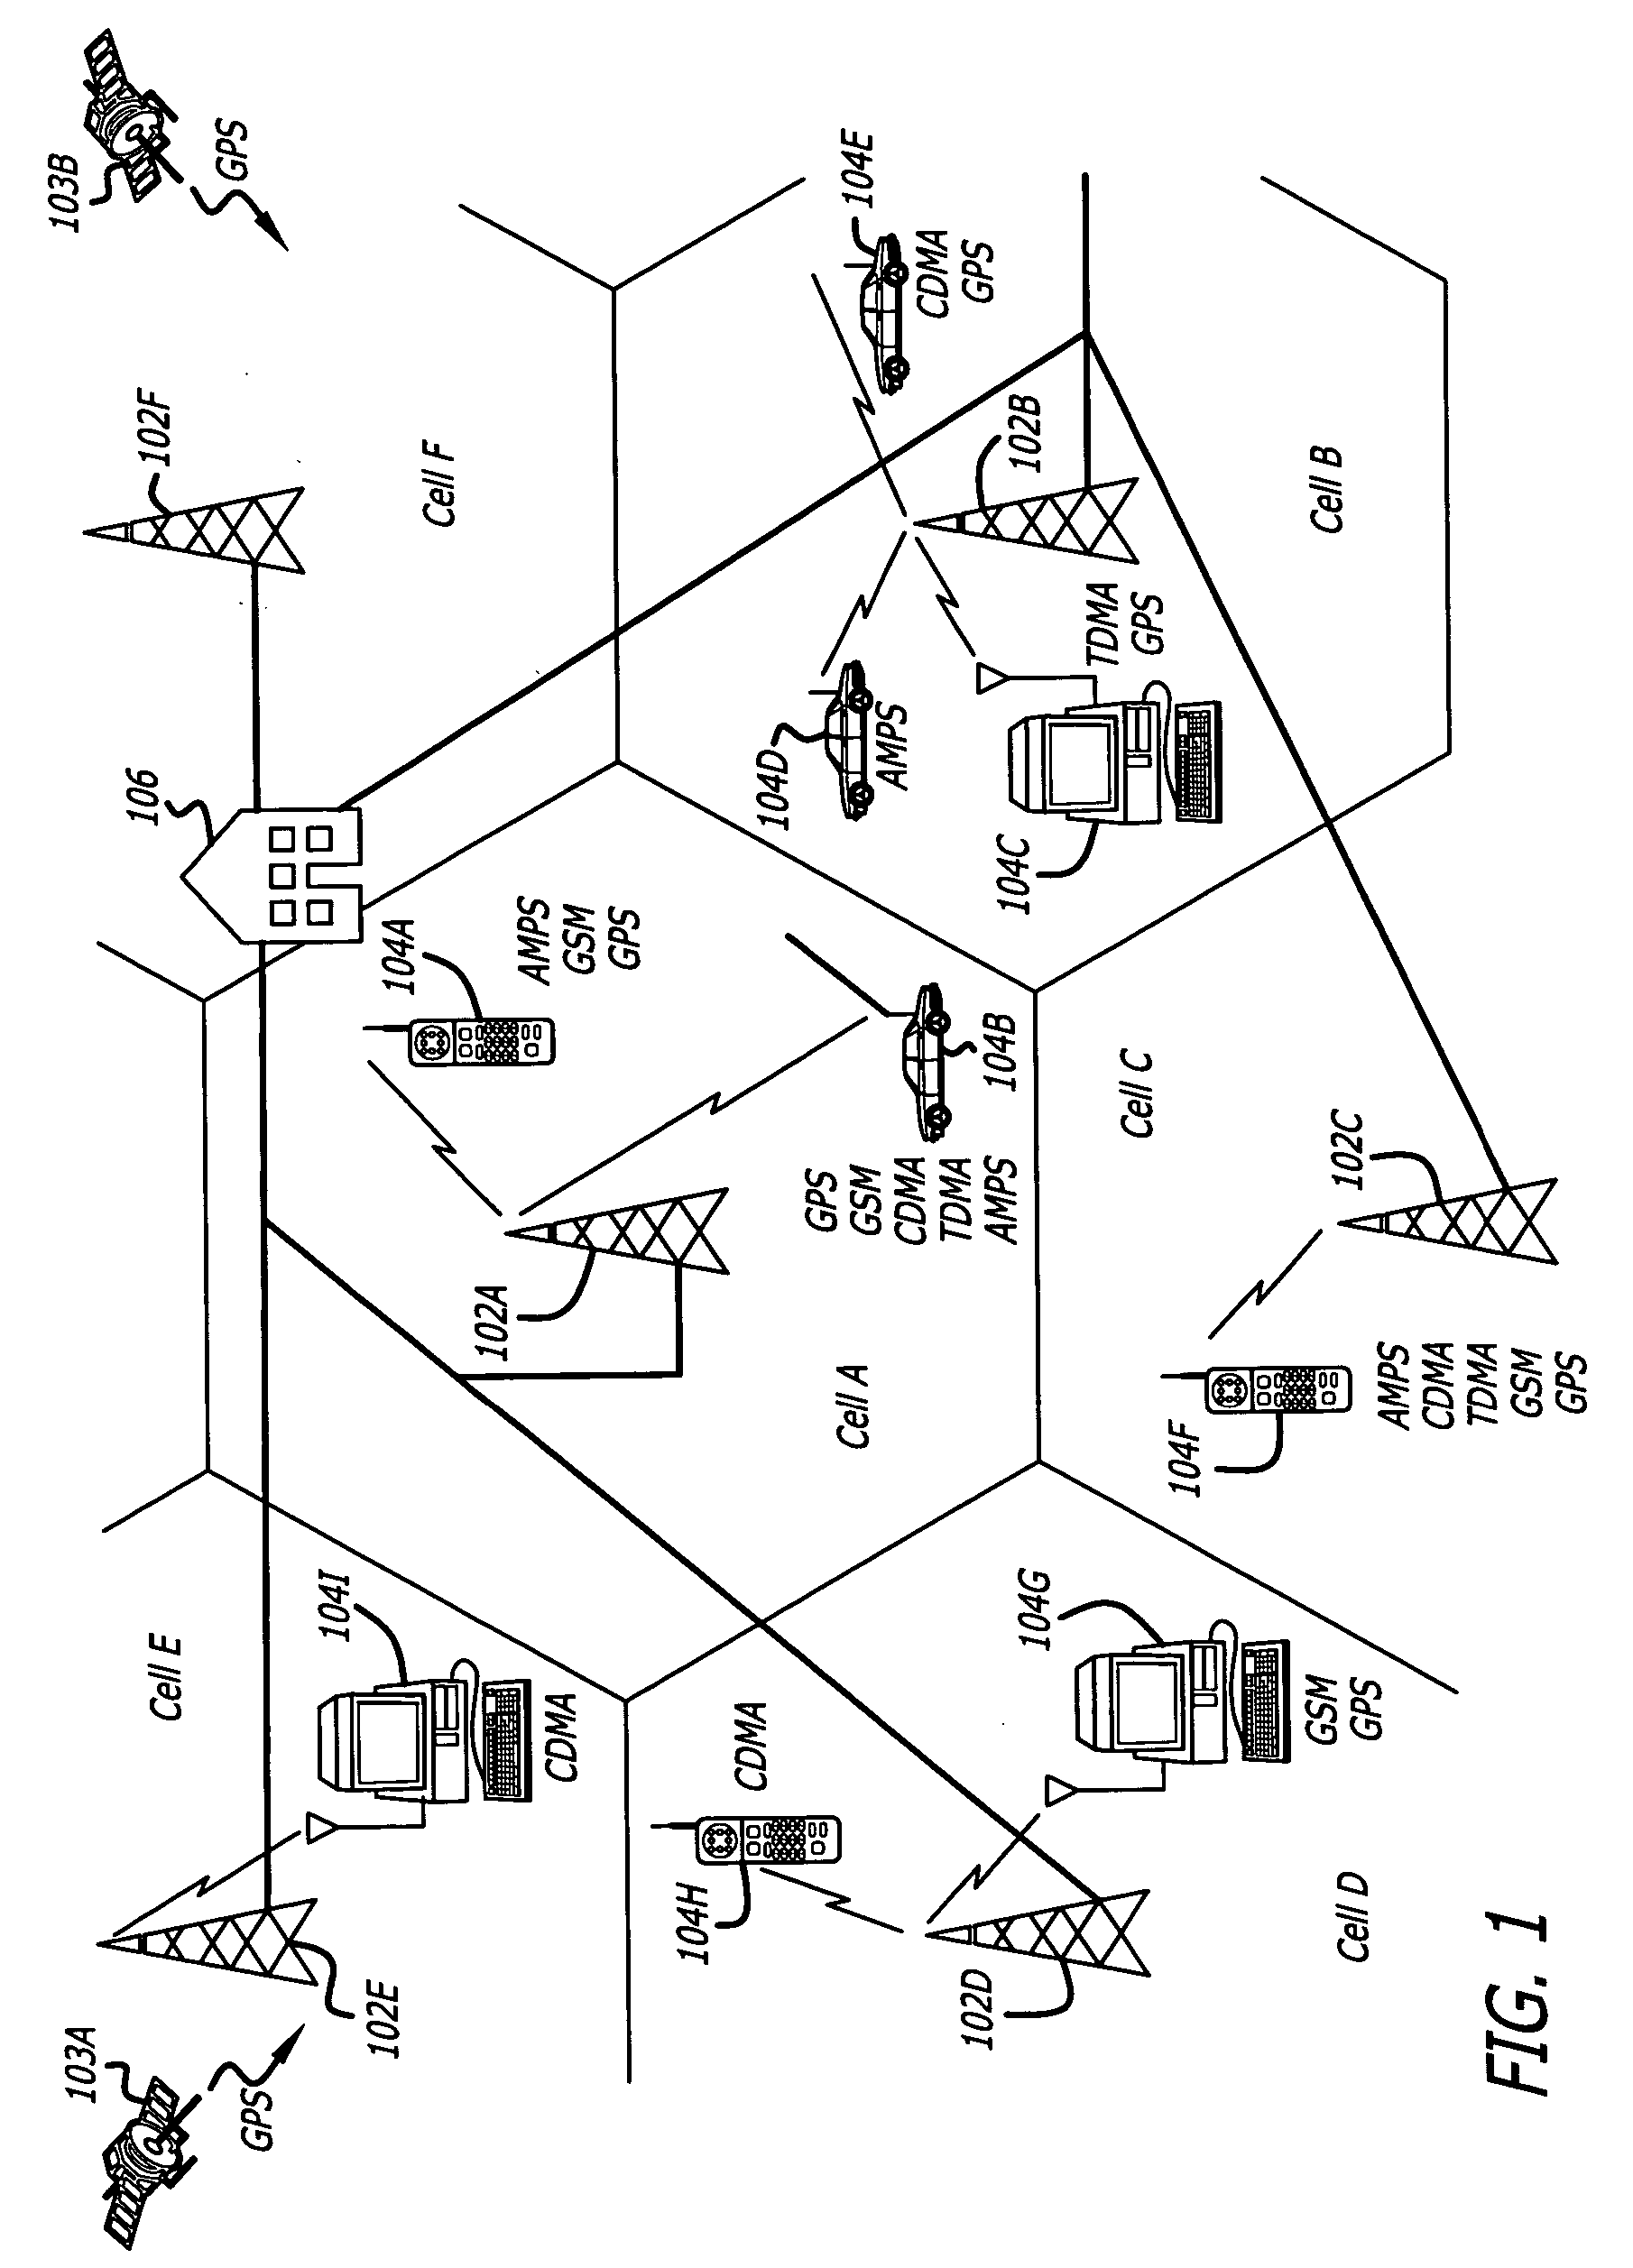 Radio integrated circuit with integrated power amplifier